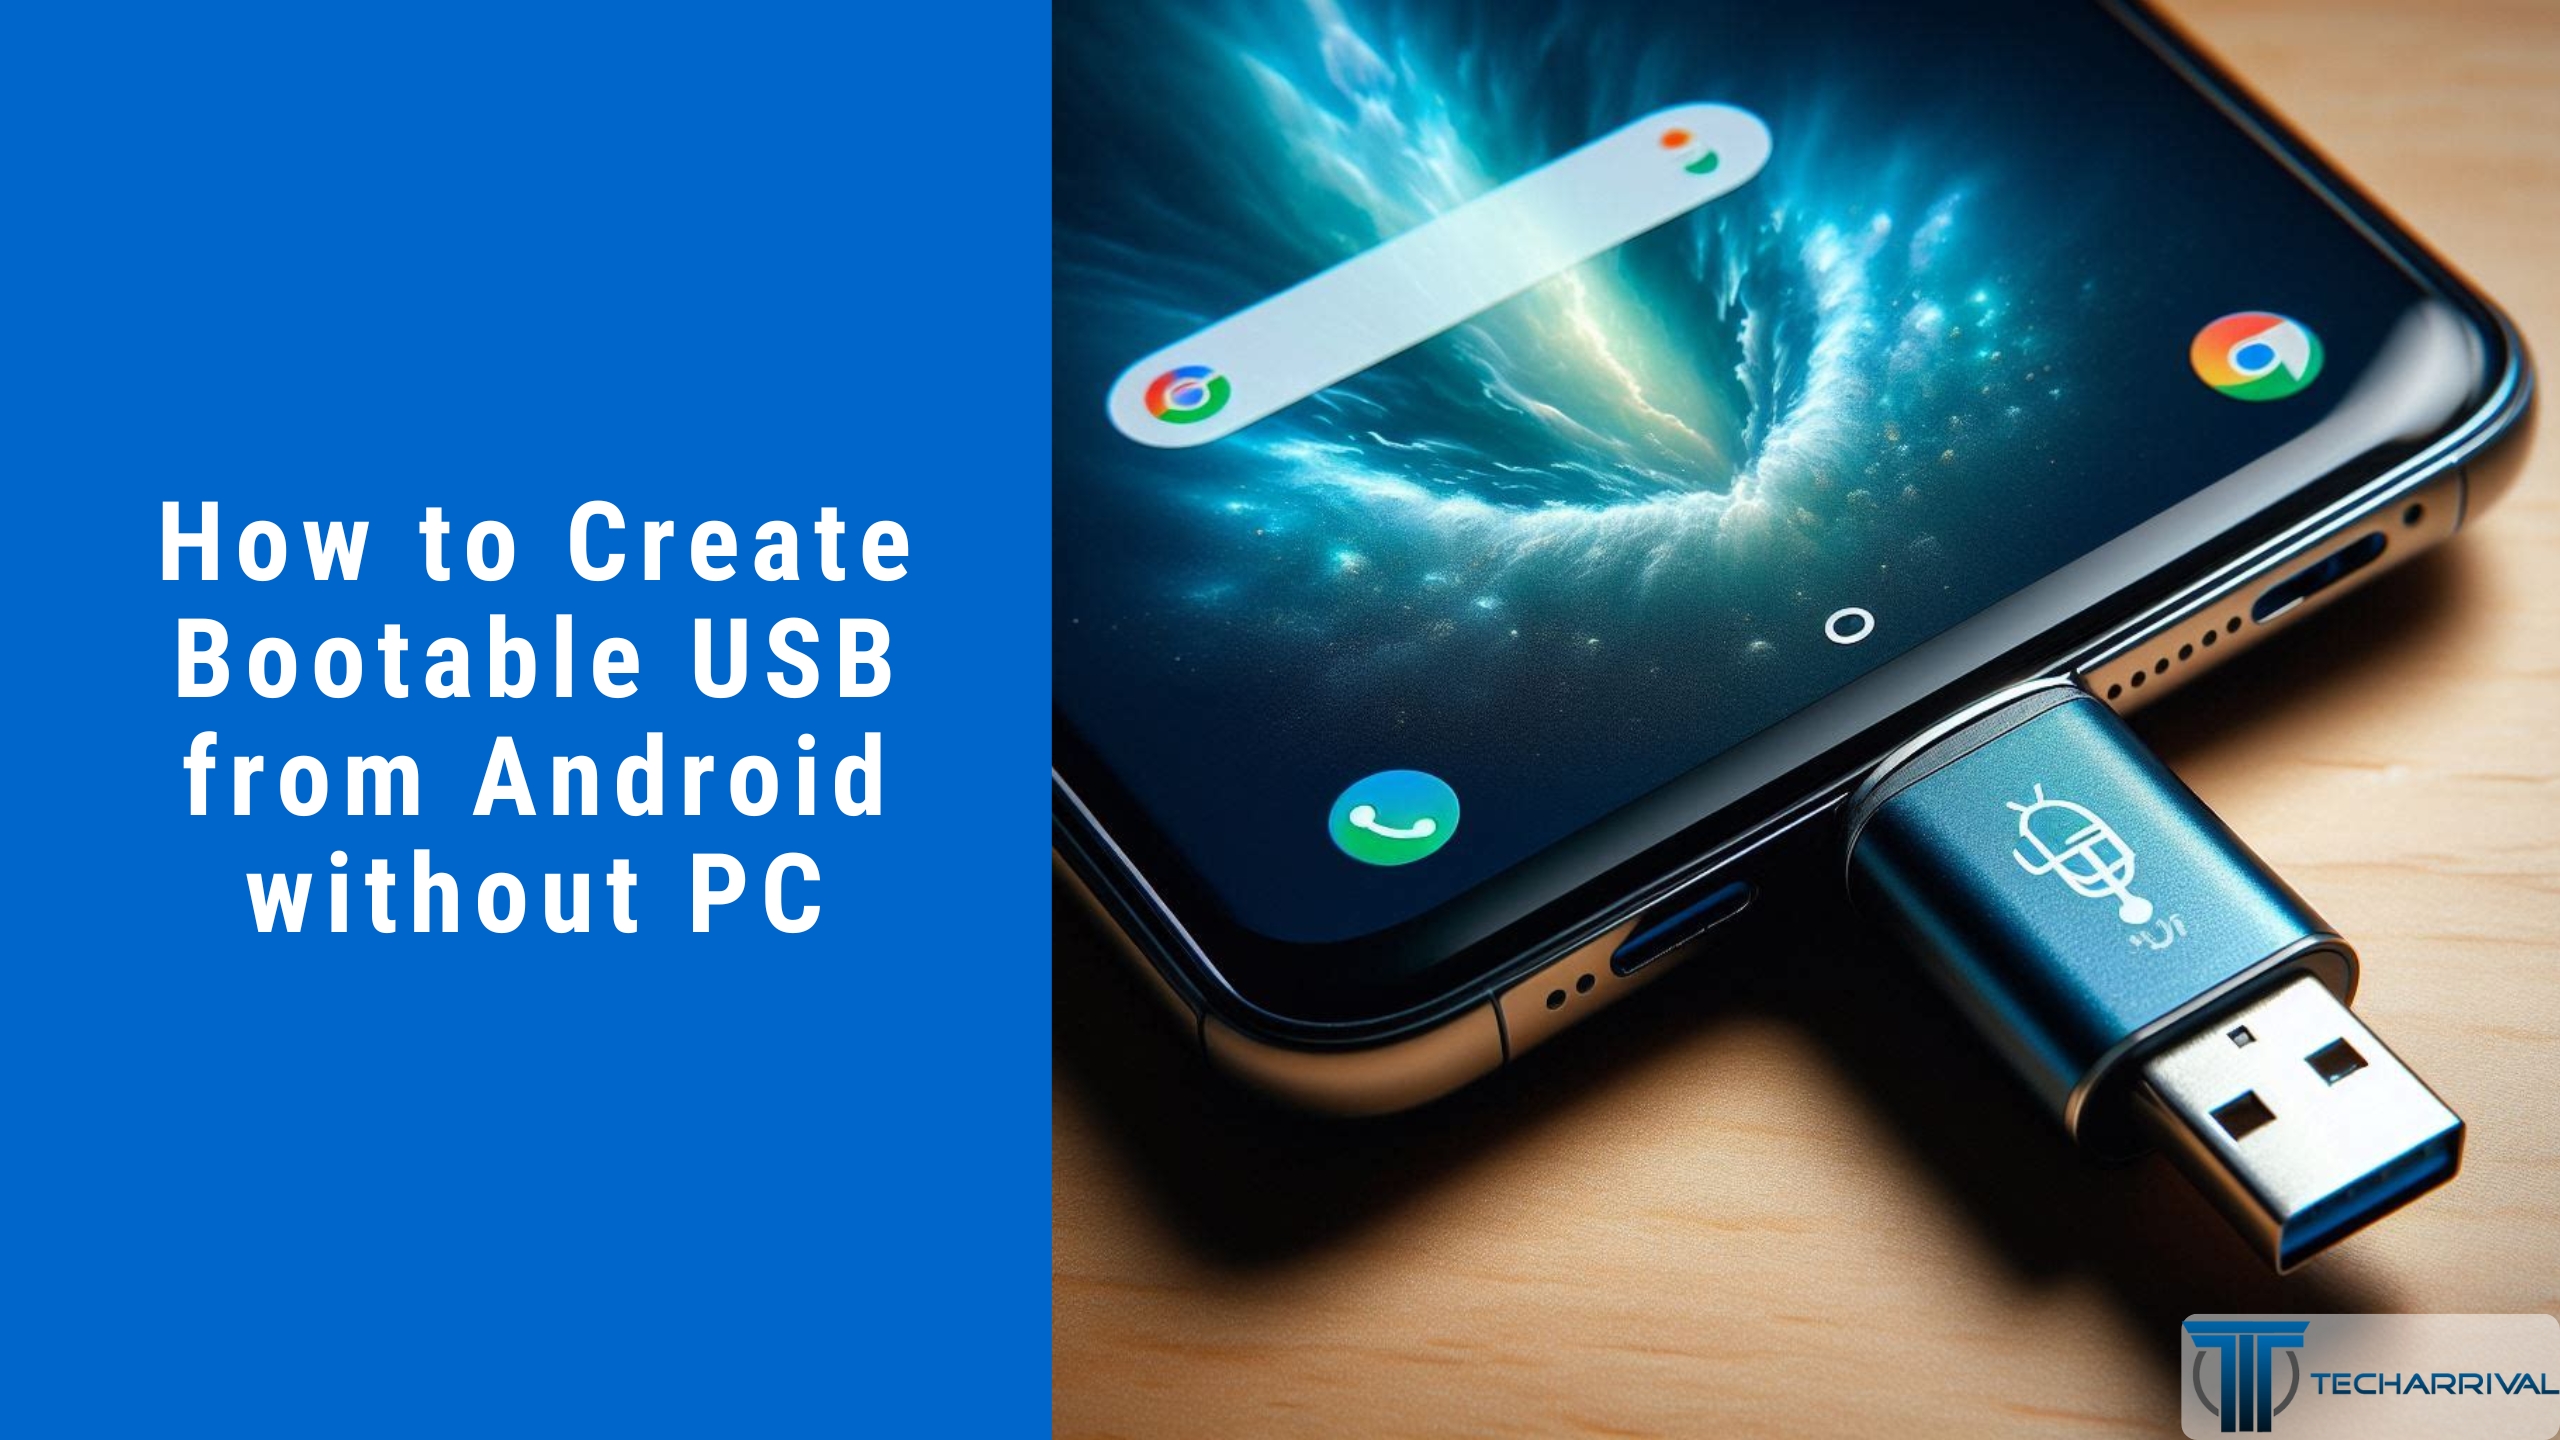 How to Create Bootable USB from Android without PC